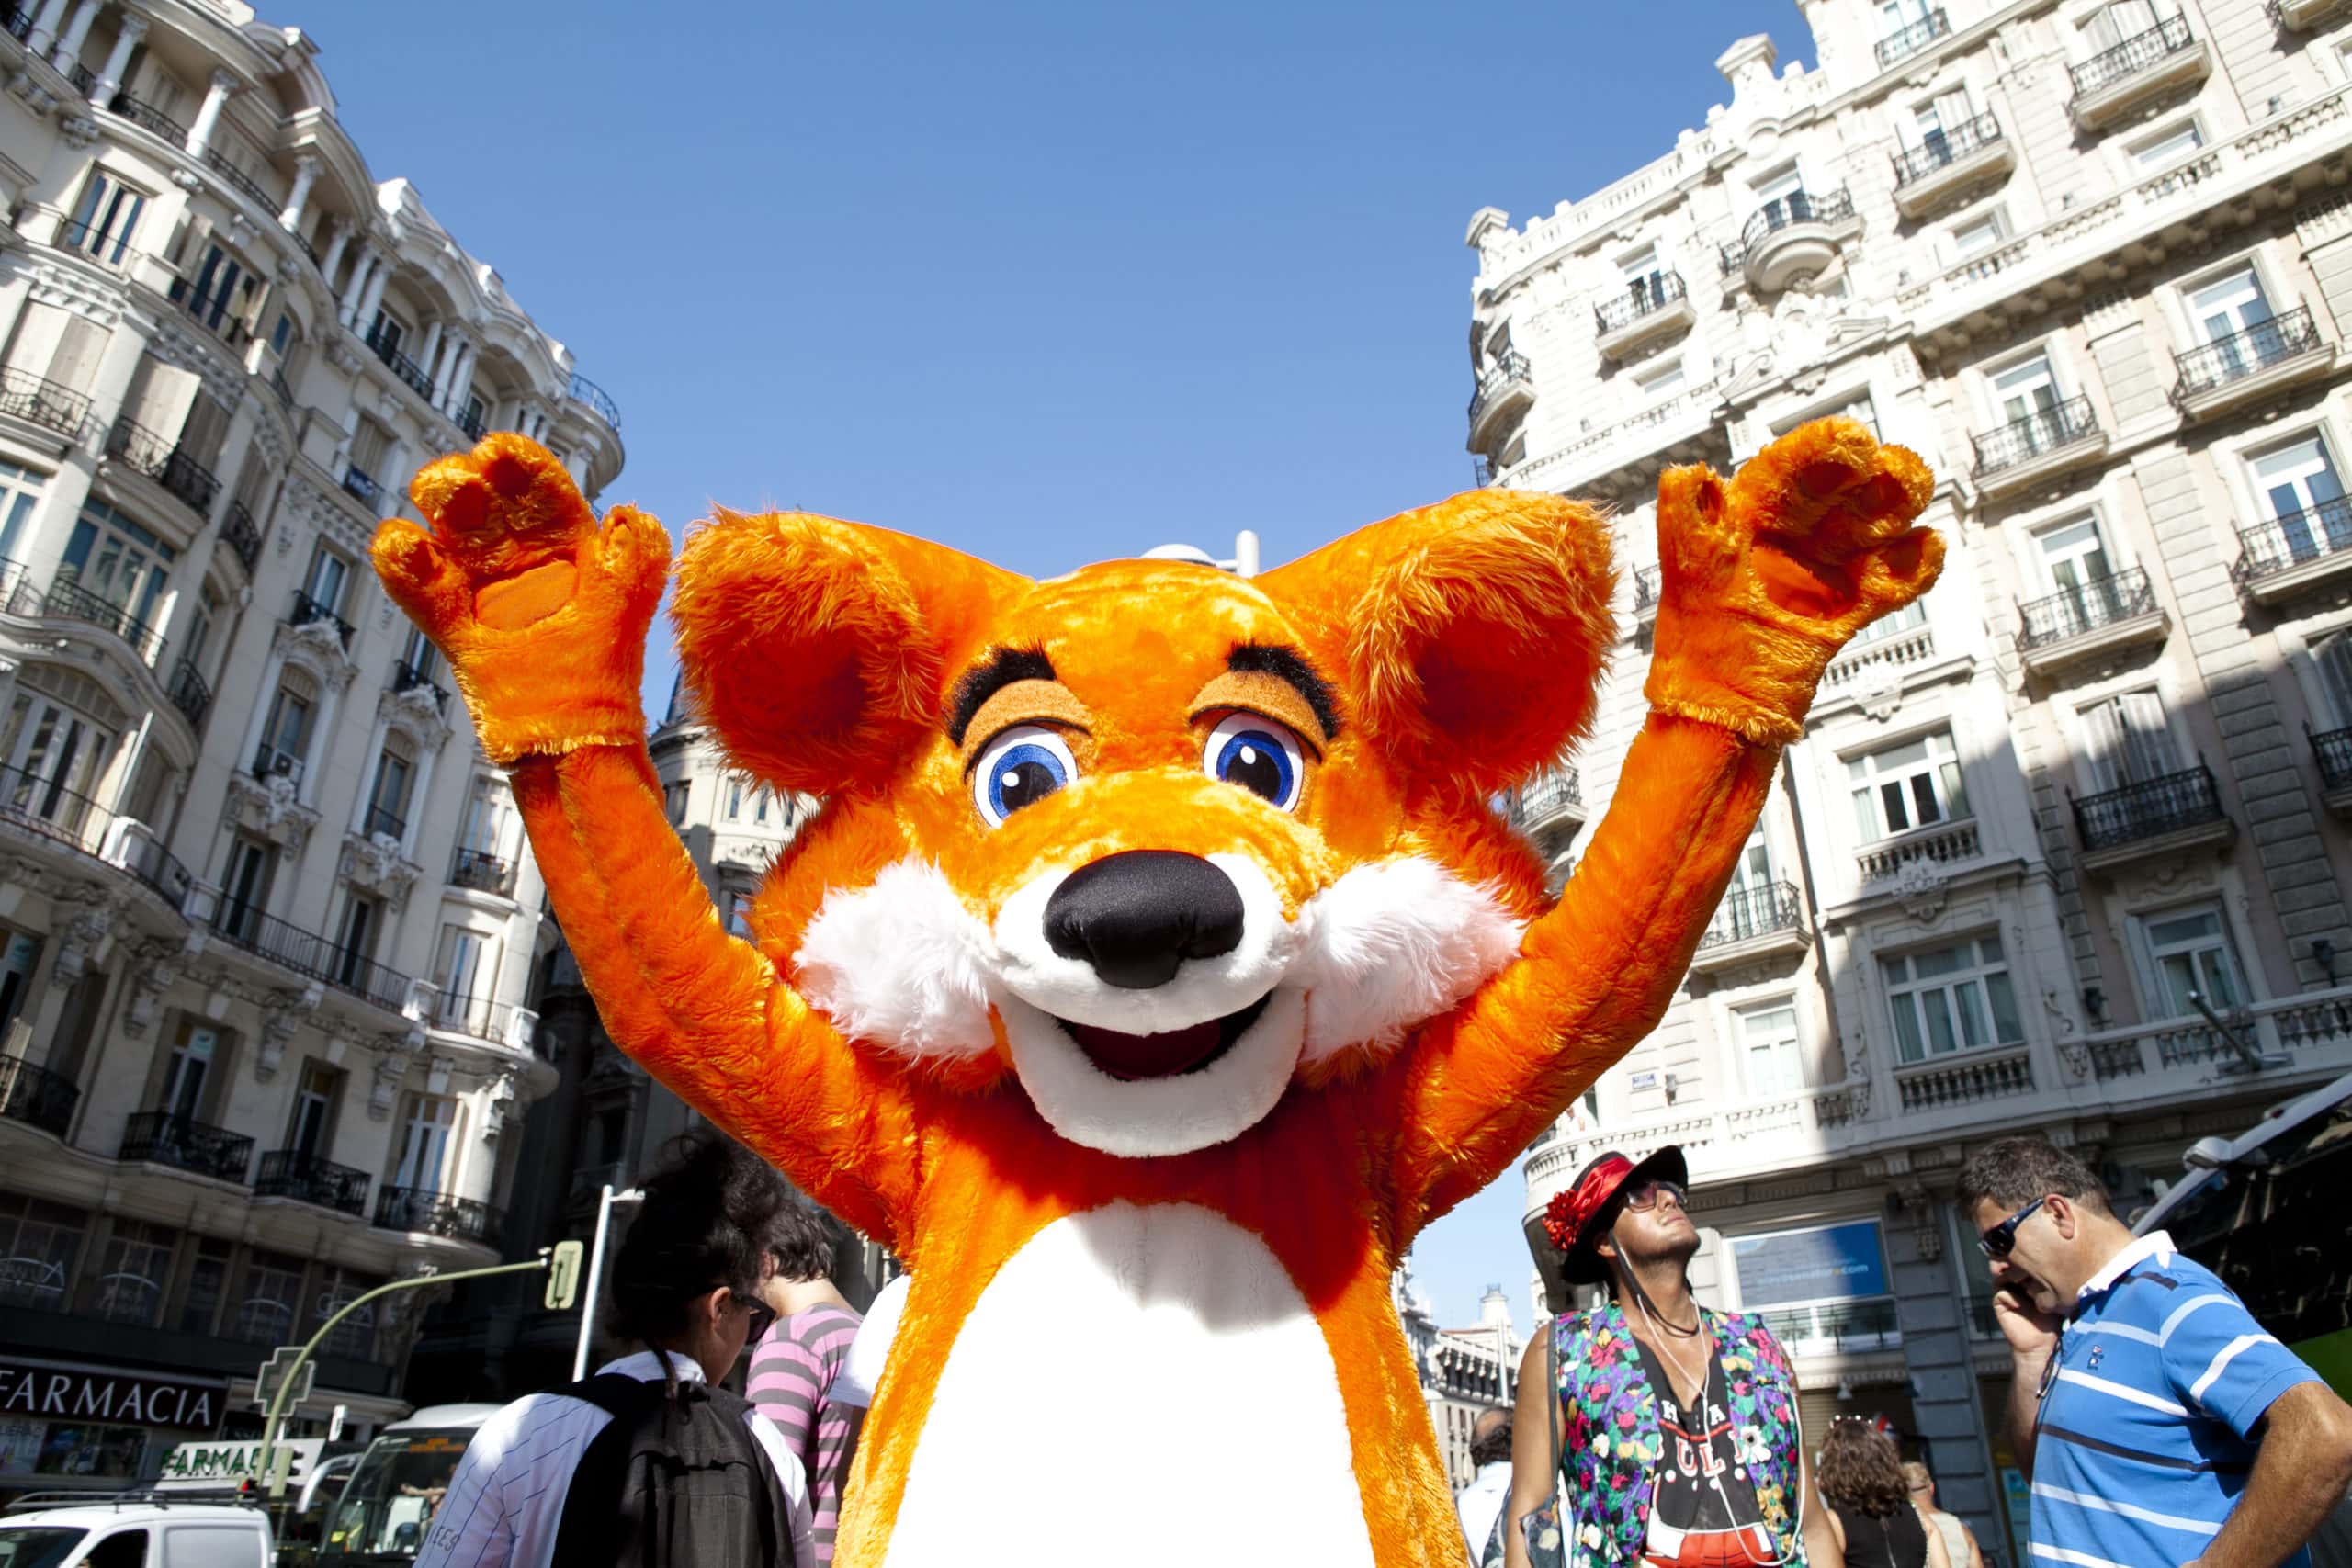 Someone in a Firefox costume